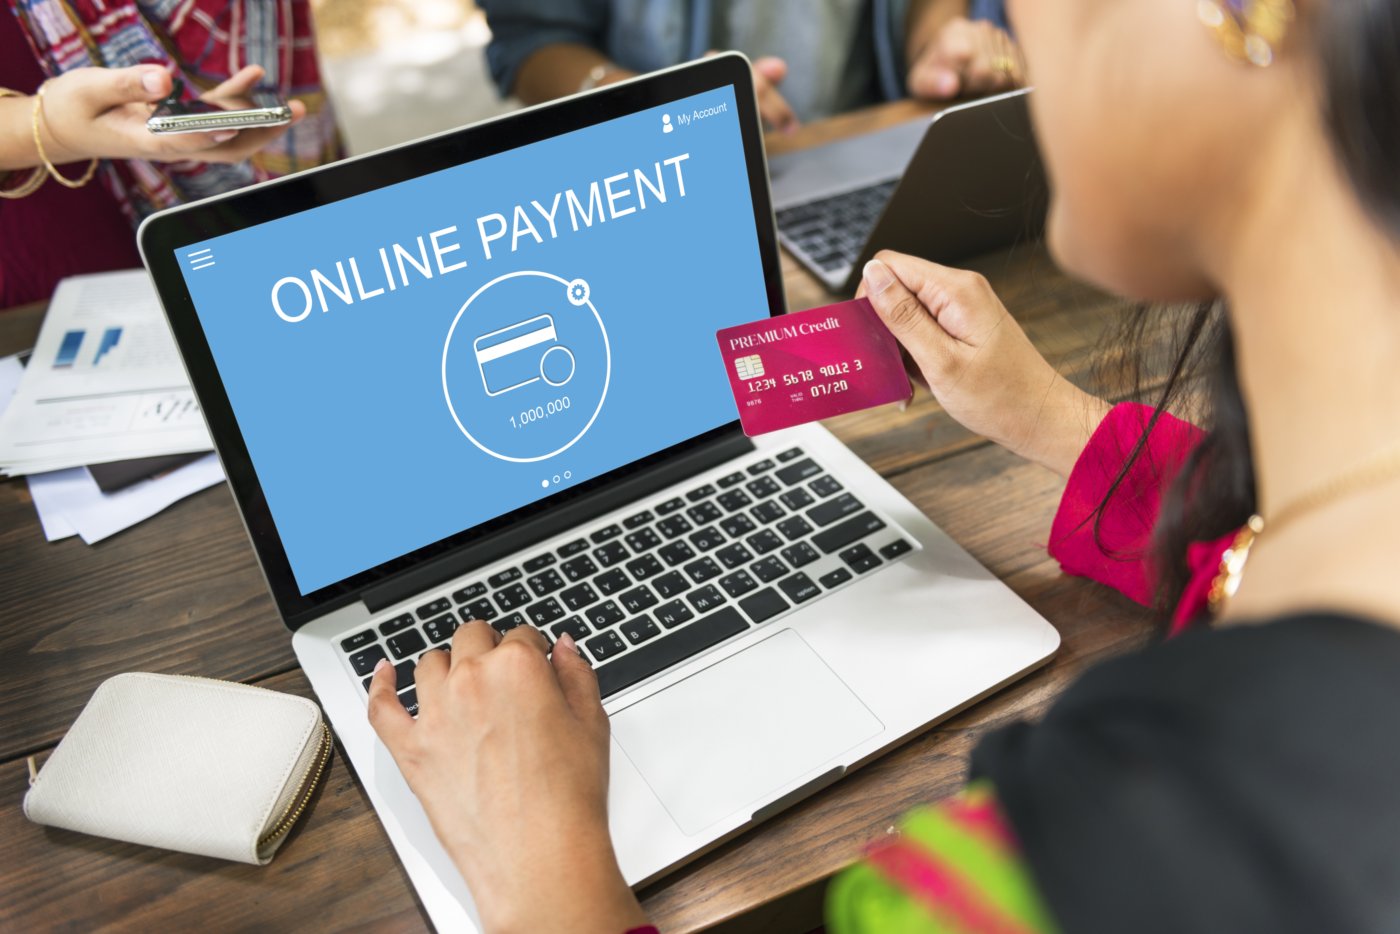 Demand for Alternative Payment Methods Will Increase